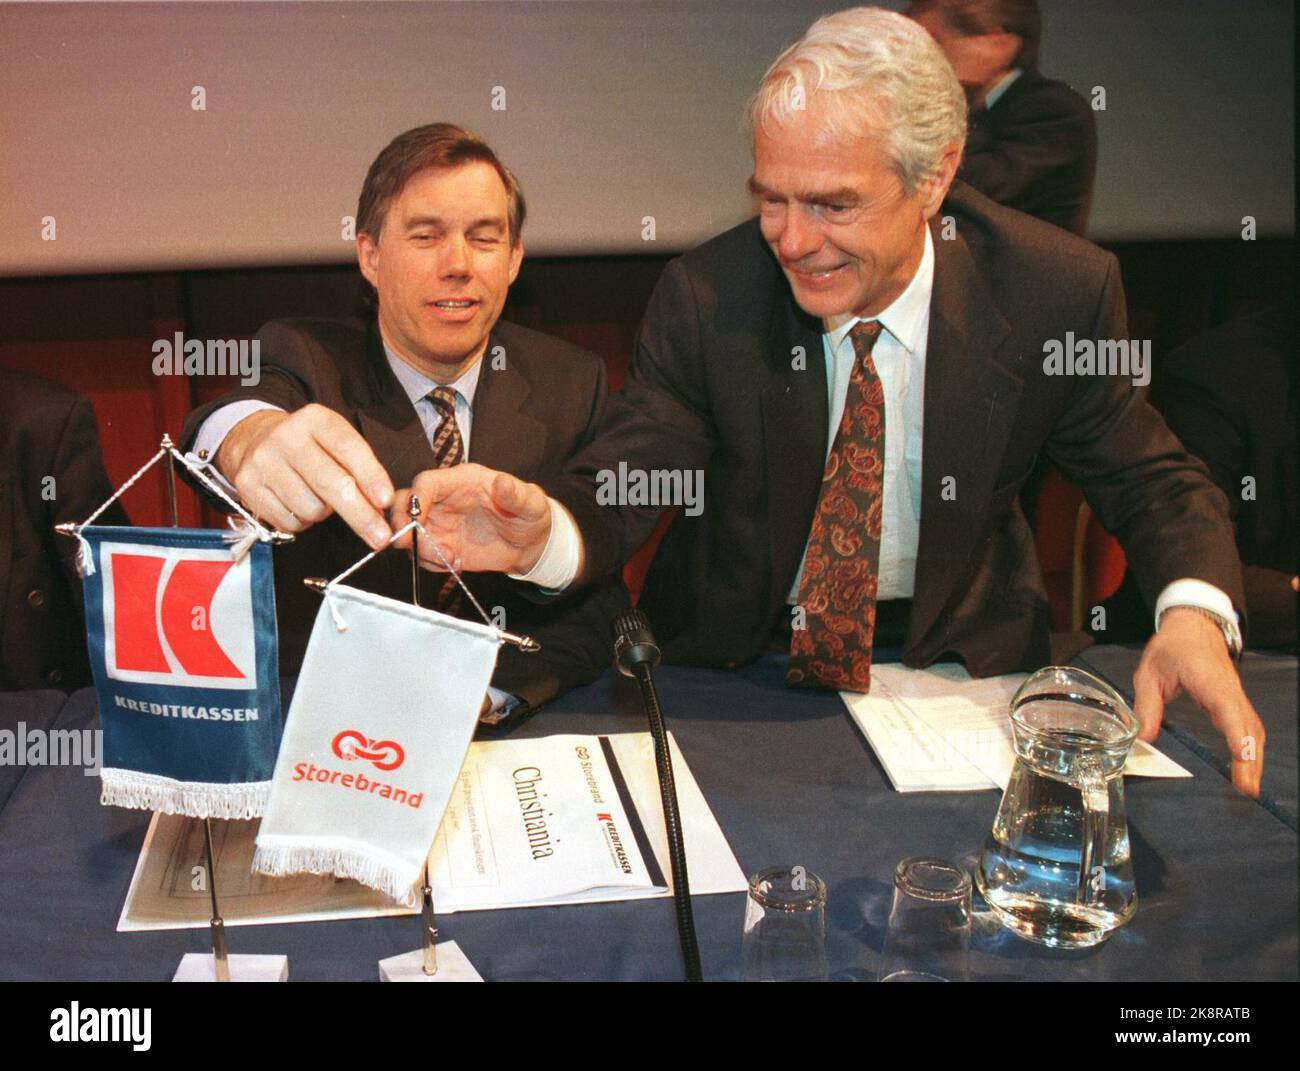 Oslo 19970402: CEO Åge Korsvold in Storebrand (t.v.) and CEO of Kreditkassen Borger A. Lenth help each other get a custom at the two companies' table pools before today's press conference on the merger between the two companies. The new company will be called Christiania. Photo: Erik Johansen / NTB Stock Photo